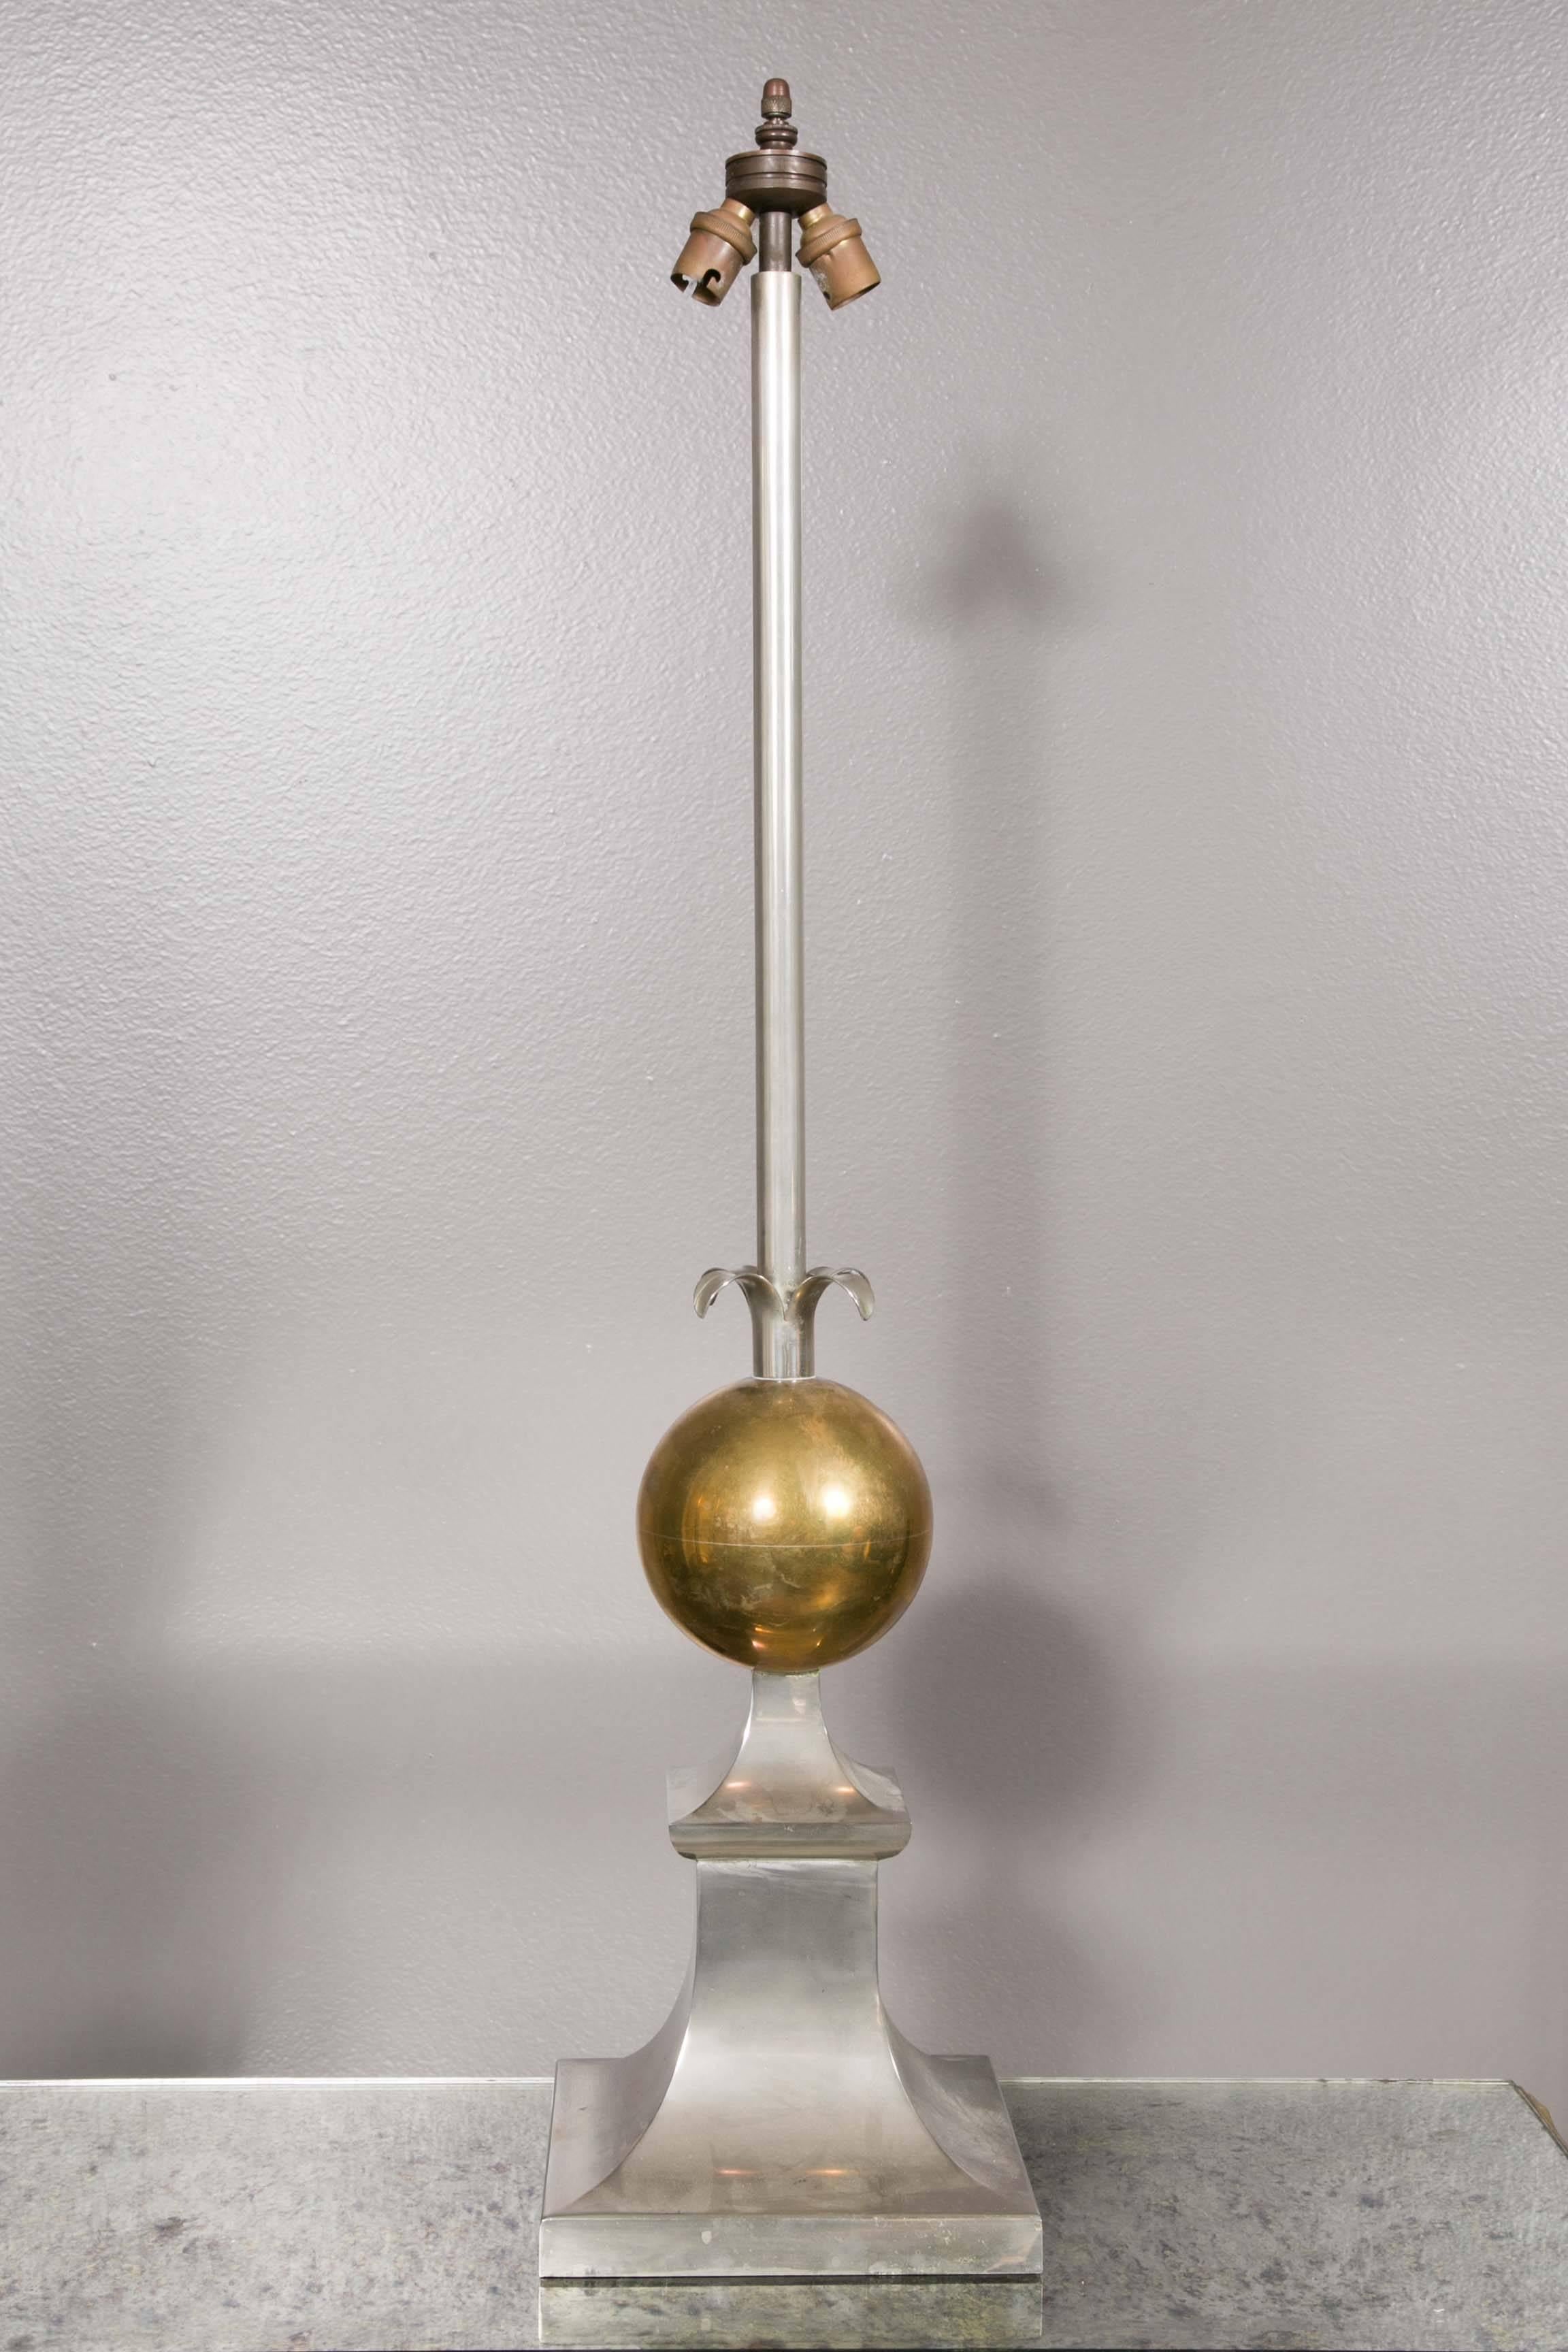 Large pair of lamps, steel and brass with a stylised fruit,
circa 1970.